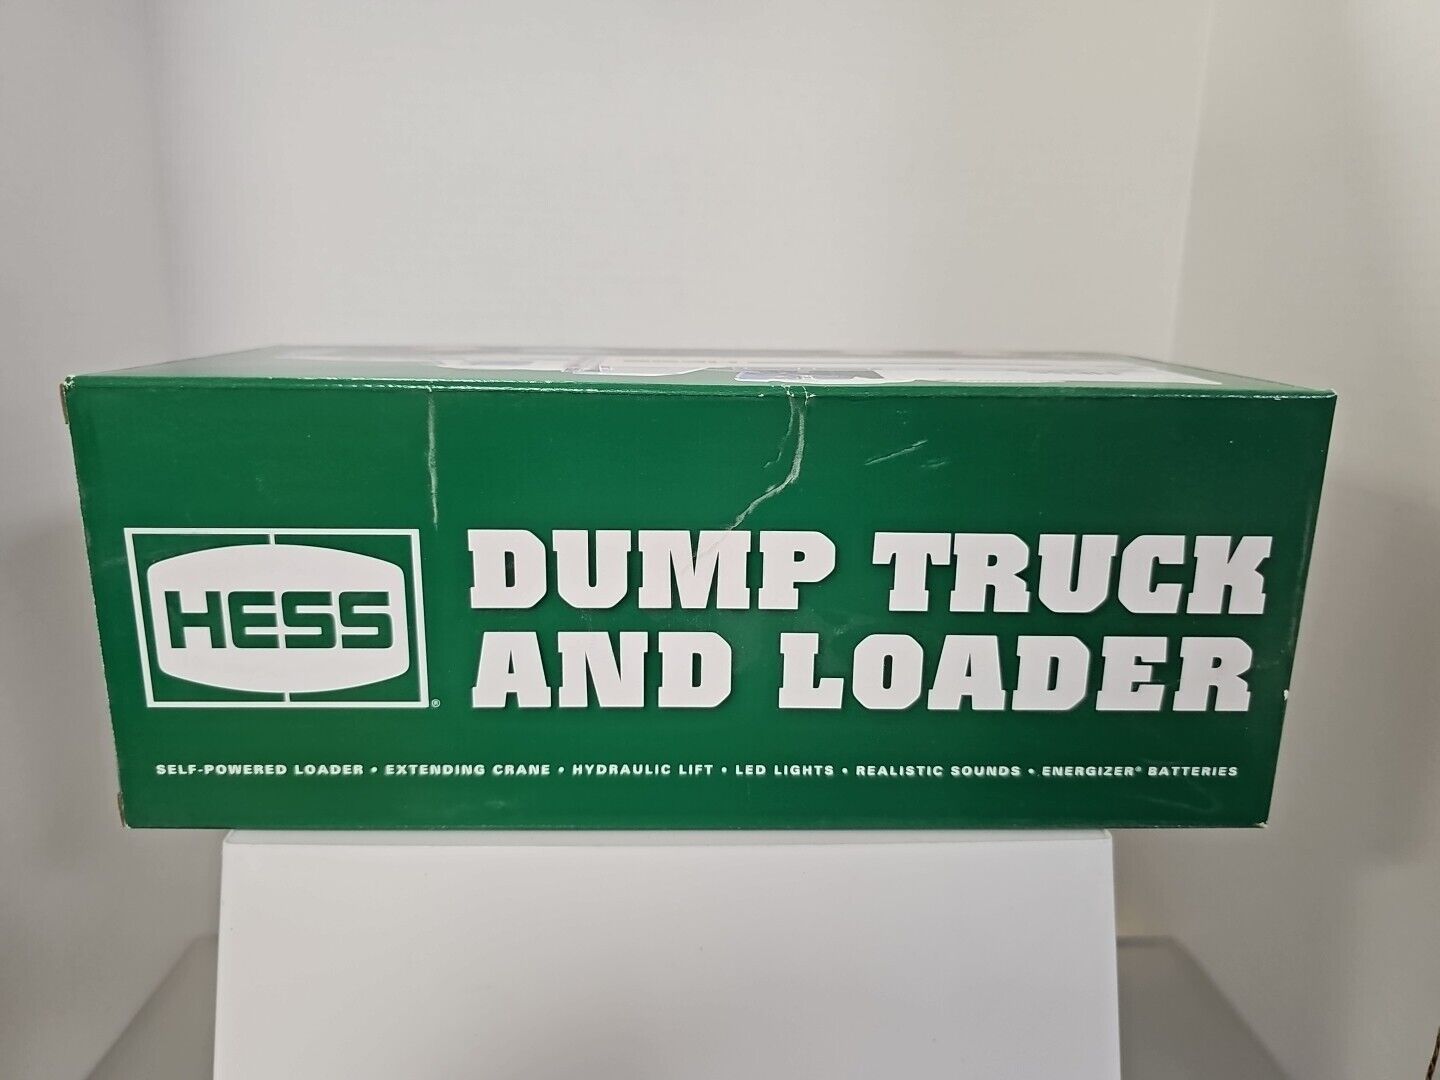 2017 Hess Dump Truck and Loader - New In Box Hess Oil & Gas Collectible Toy